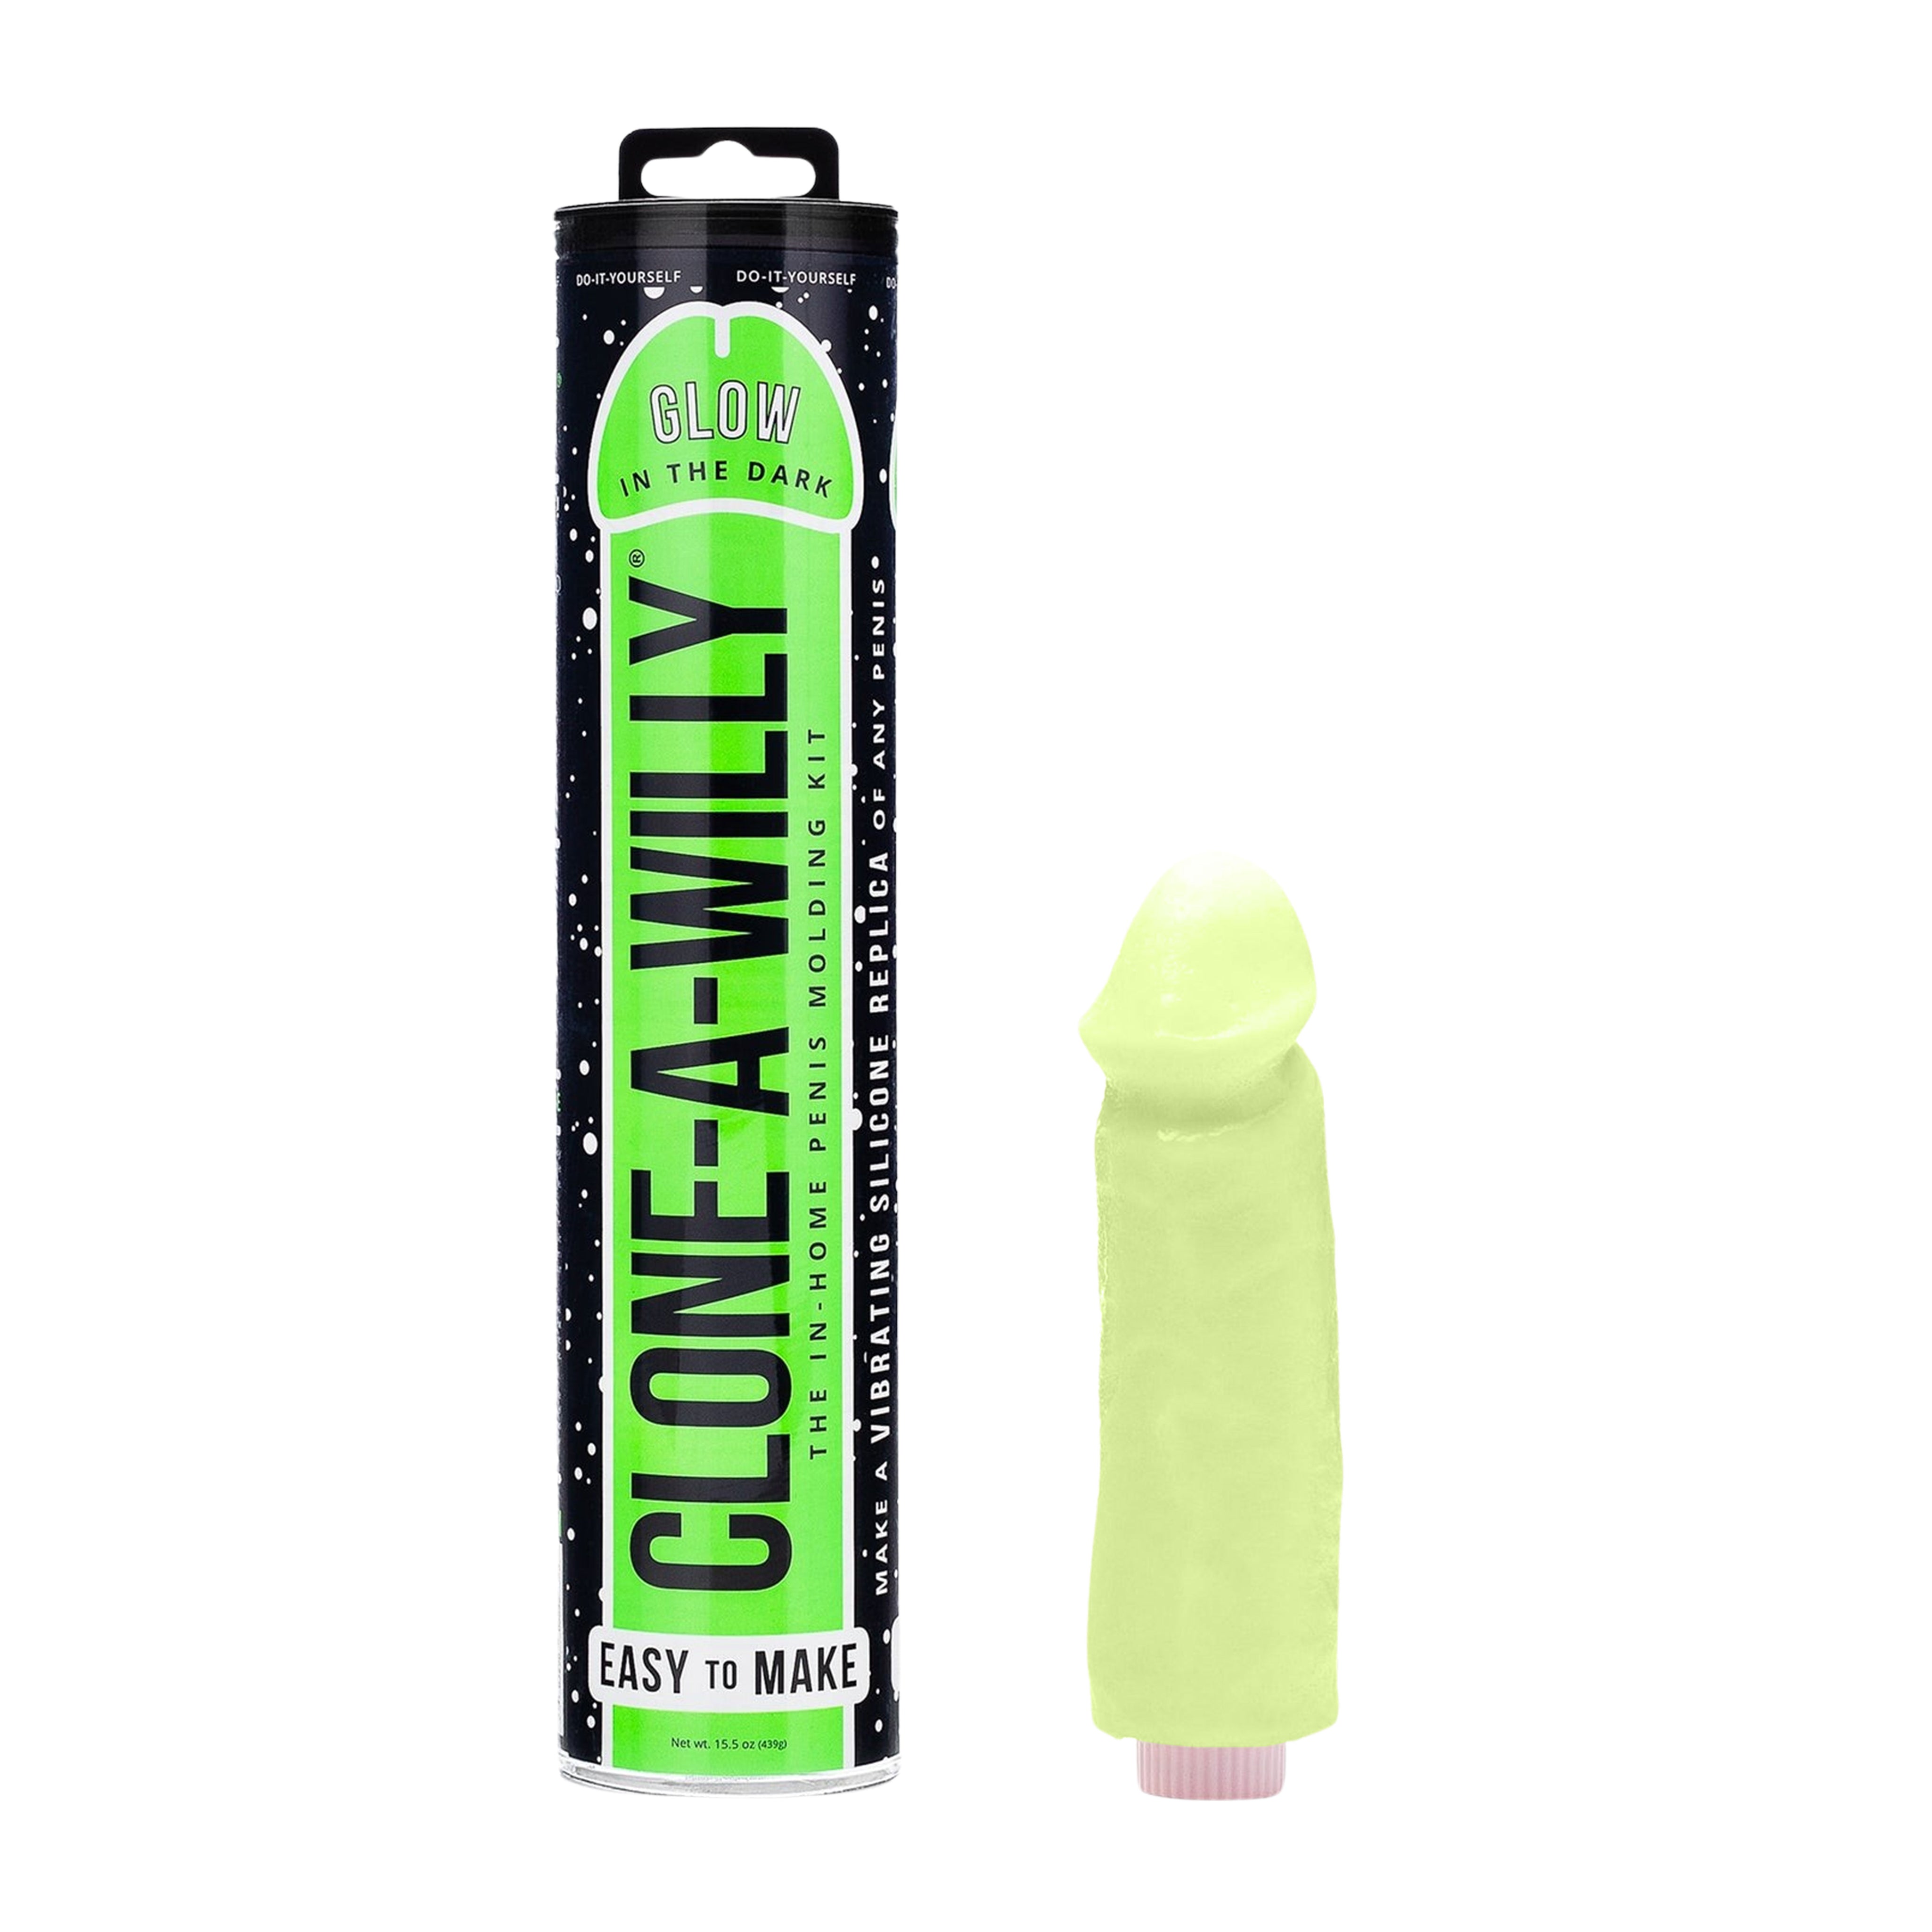 Clone-A-Willy Silicone Dildo Molding Kit With Vibrator - Glow In The Dark - Green